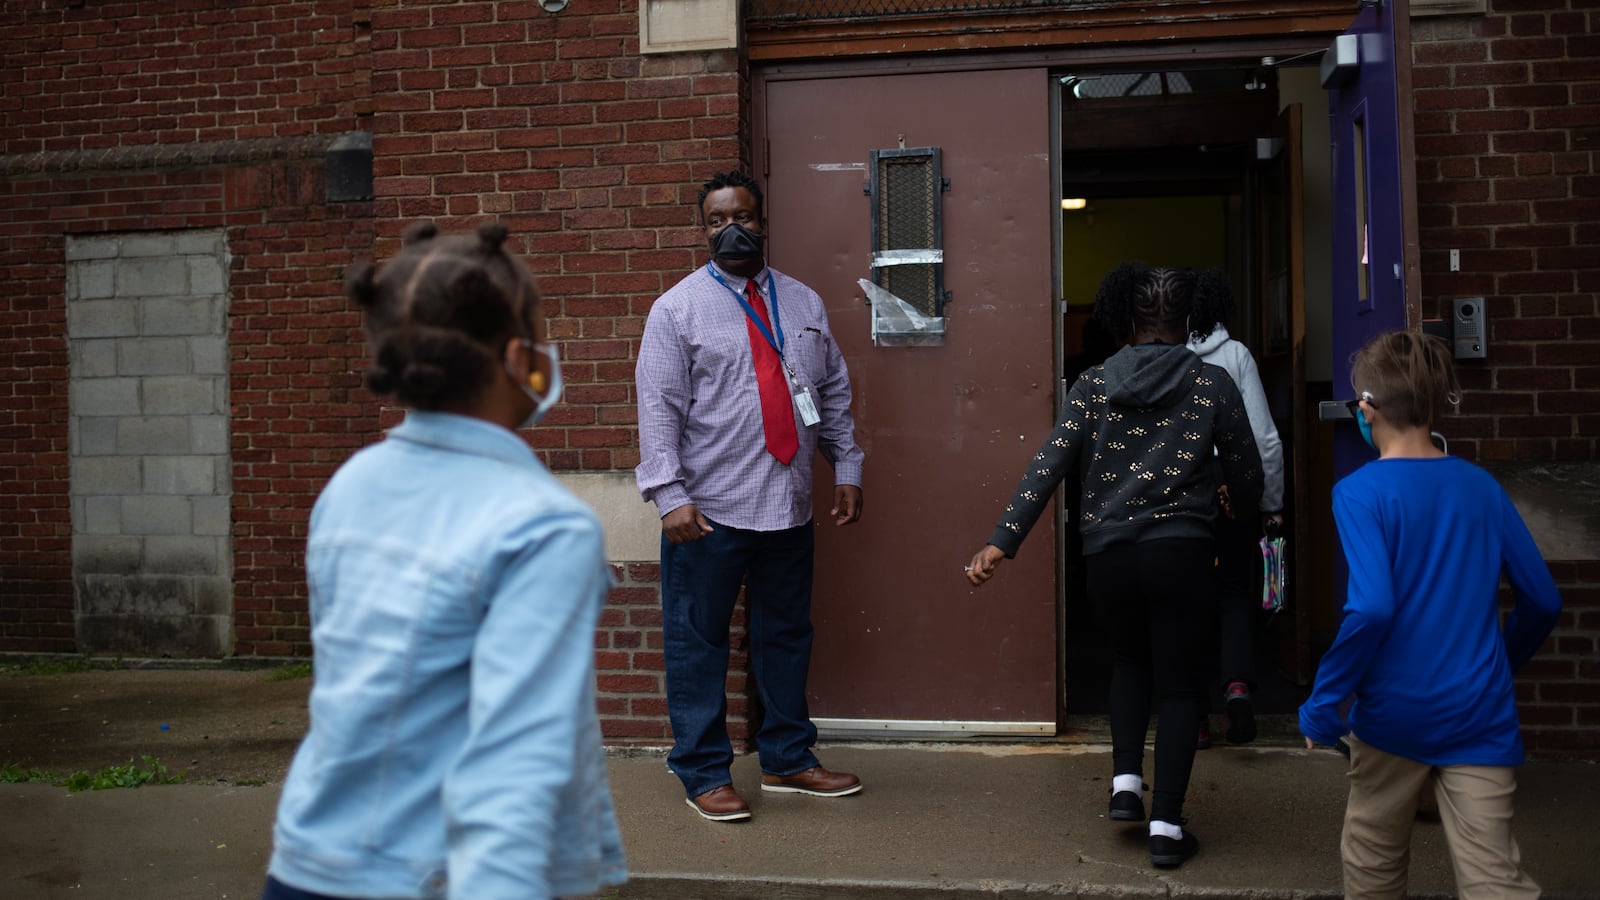 A teacher watches as students make their way into the brick facade of their school.